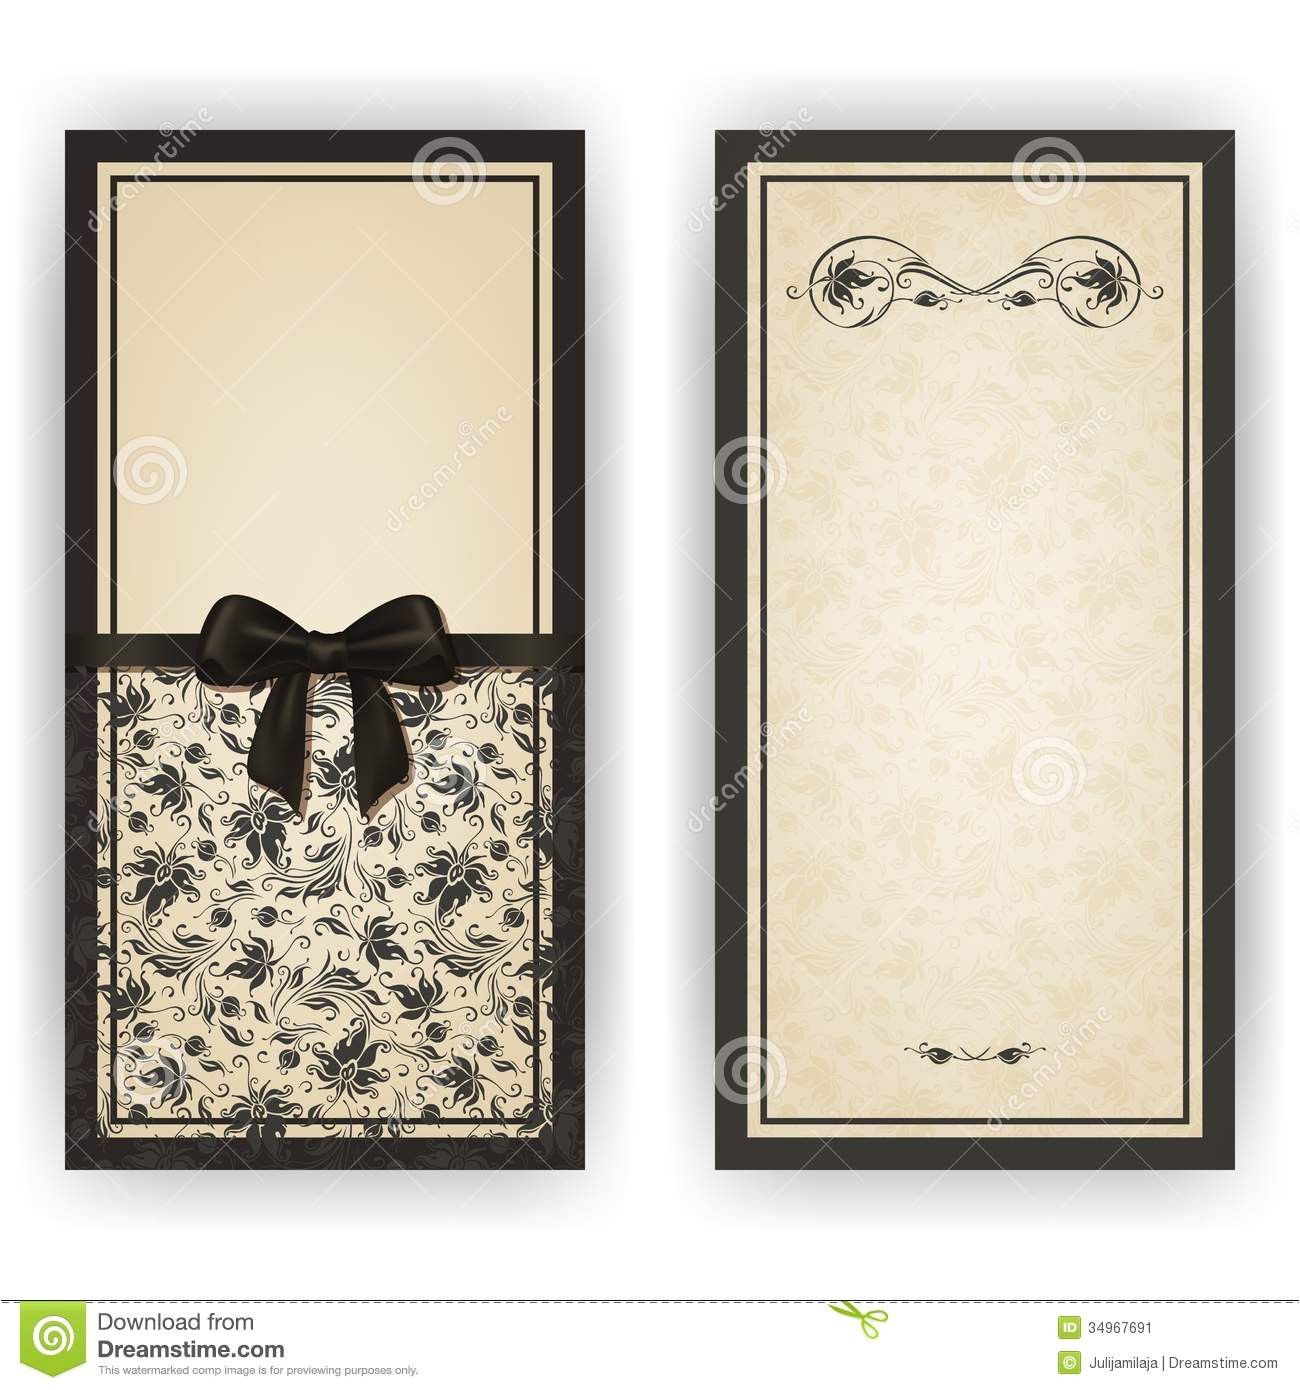 stock image elegant vector template luxury invitation card lace ornament bow place text floral elements ornate background image34967691